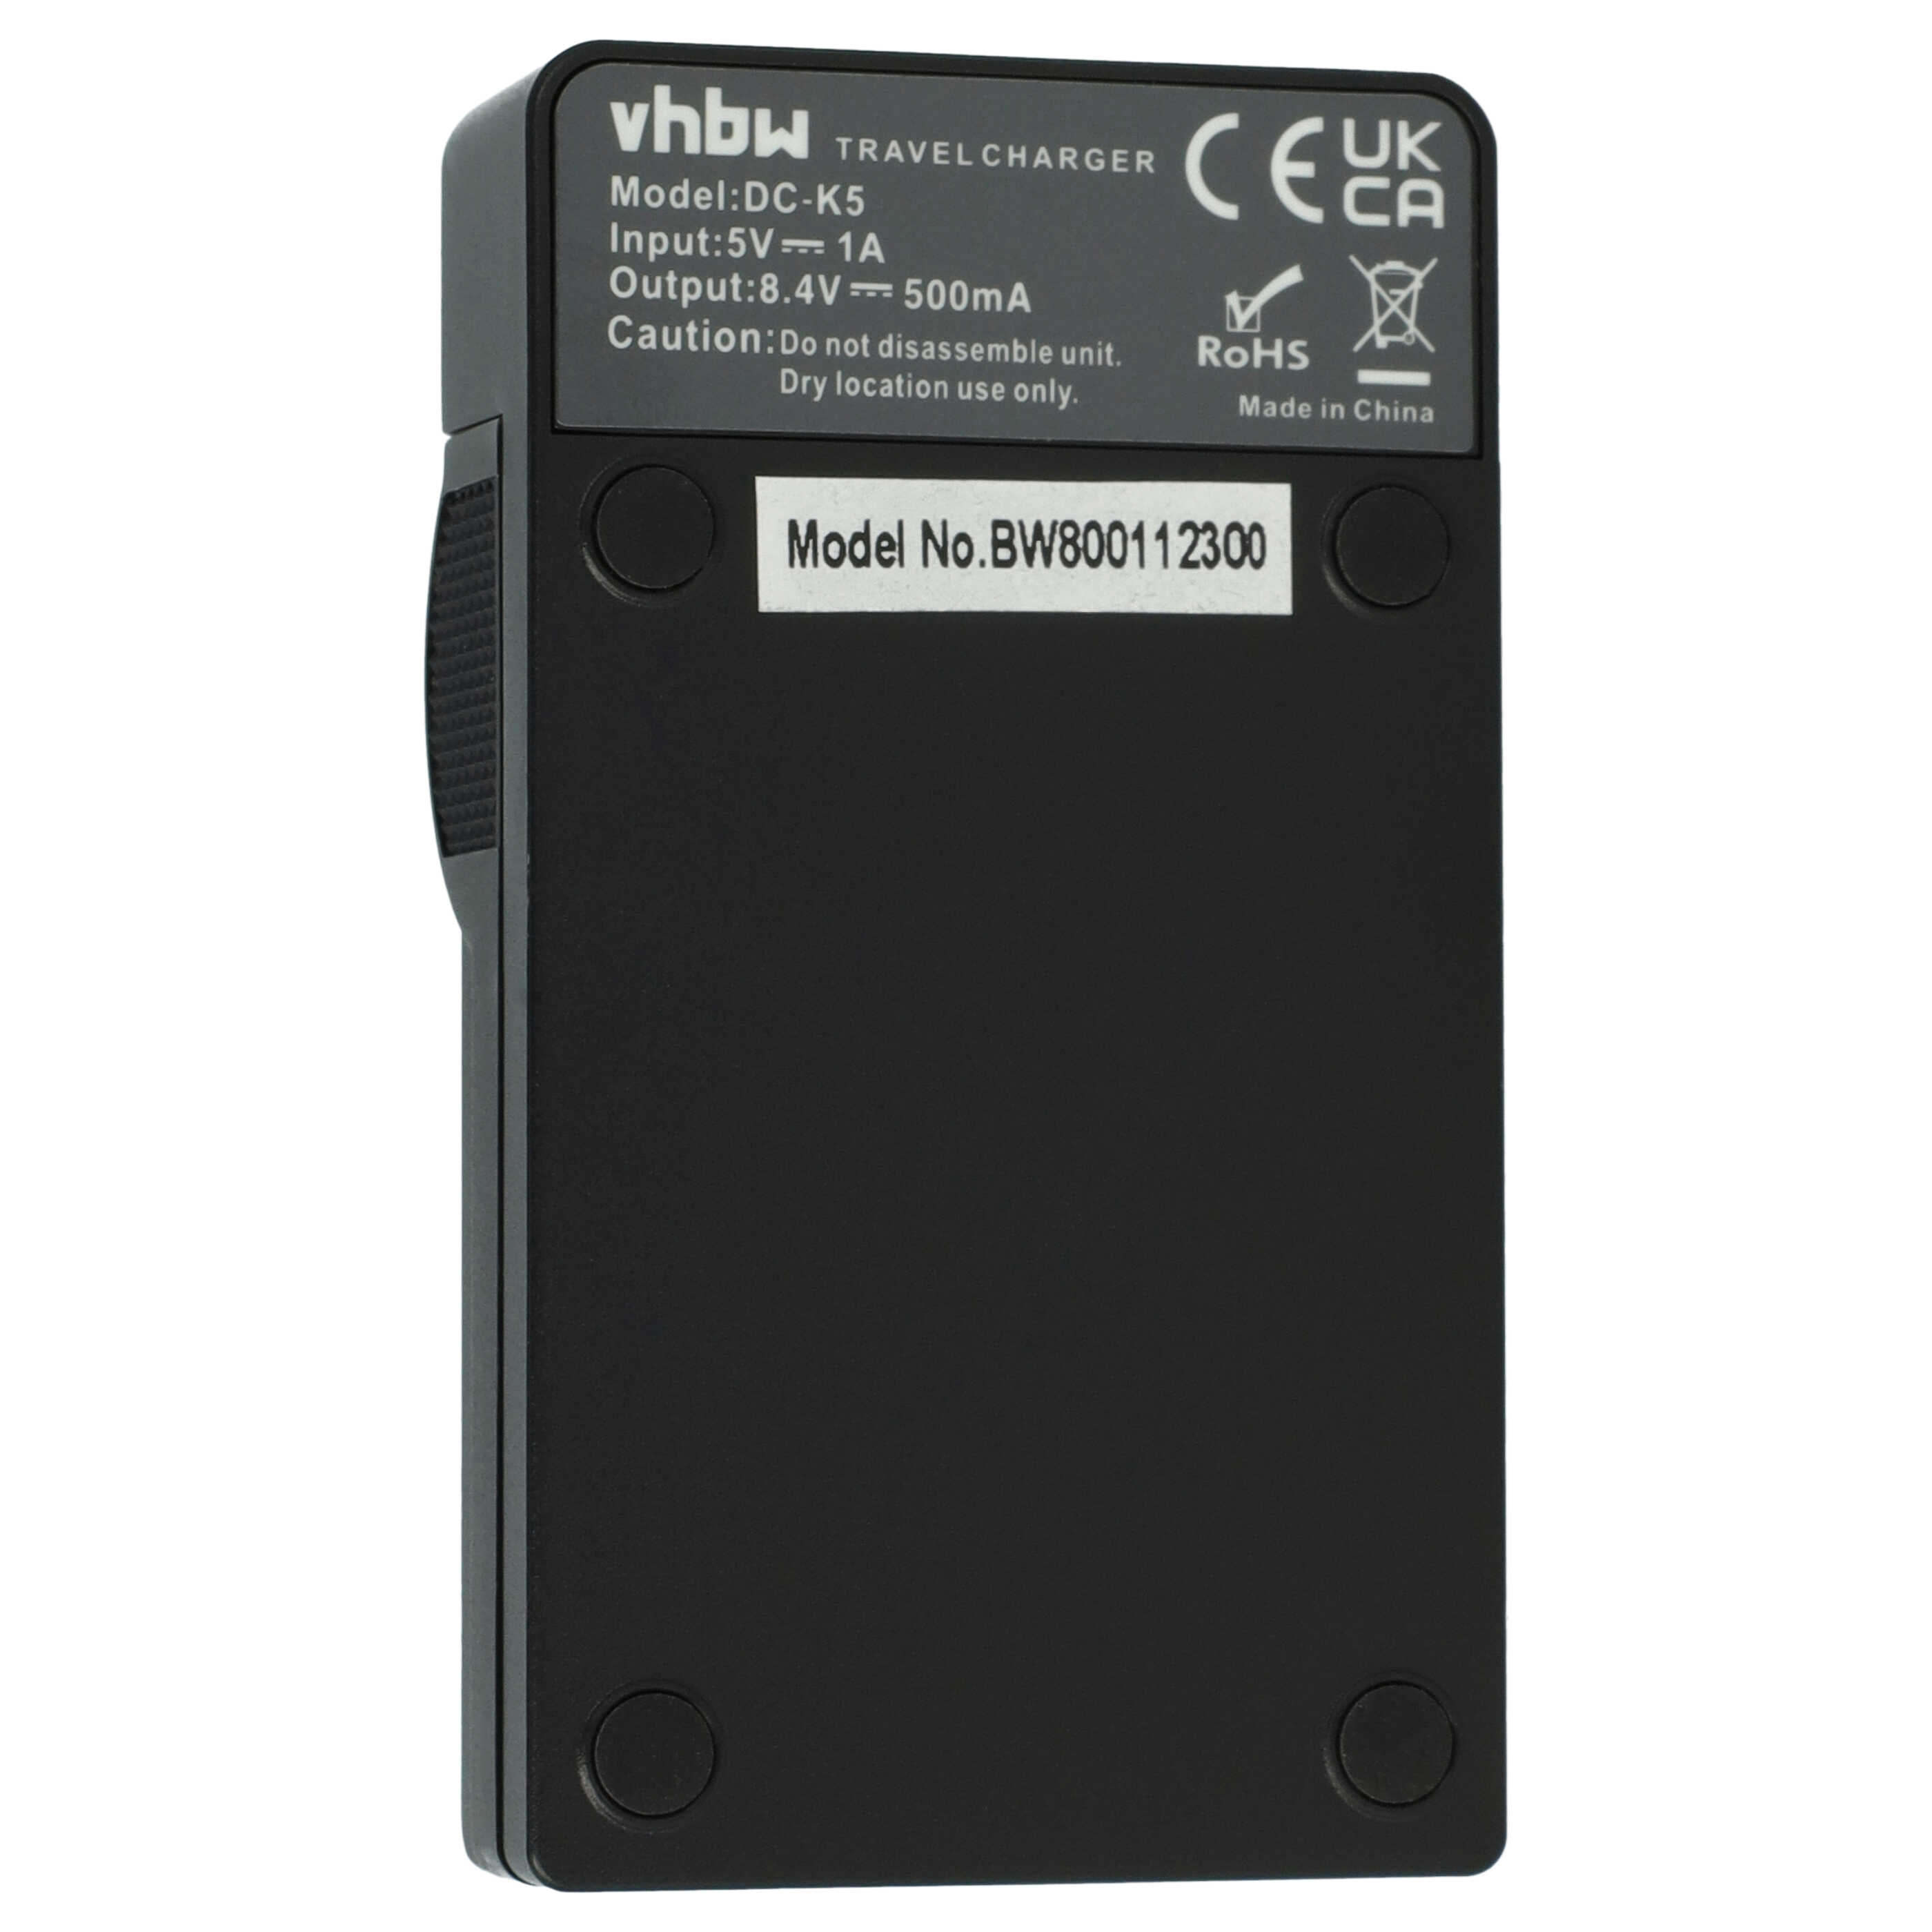 Battery Charger replaces Nikon MH-24 suitable for Coolpix P7000 Camera etc. - 0.5 A, 8.4 V